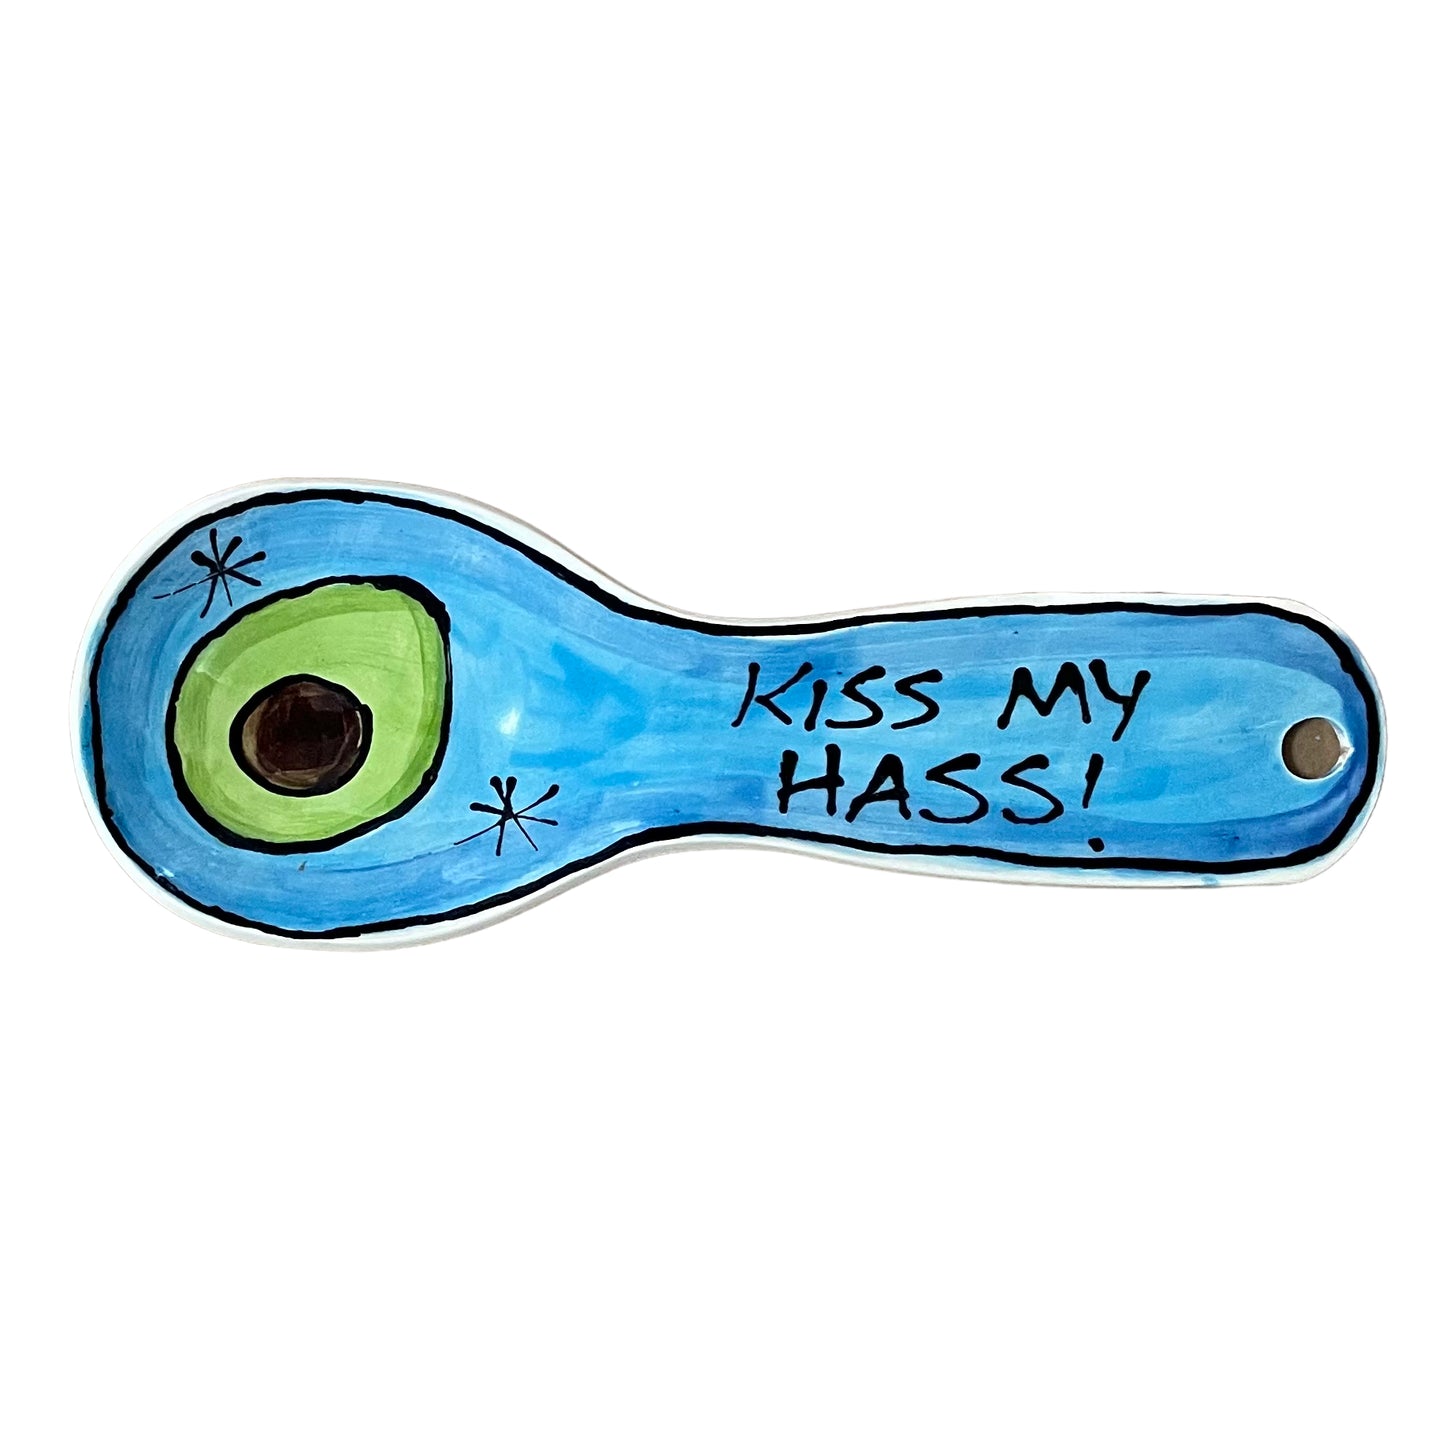 Spoon Rests, Kiss My Hass!.